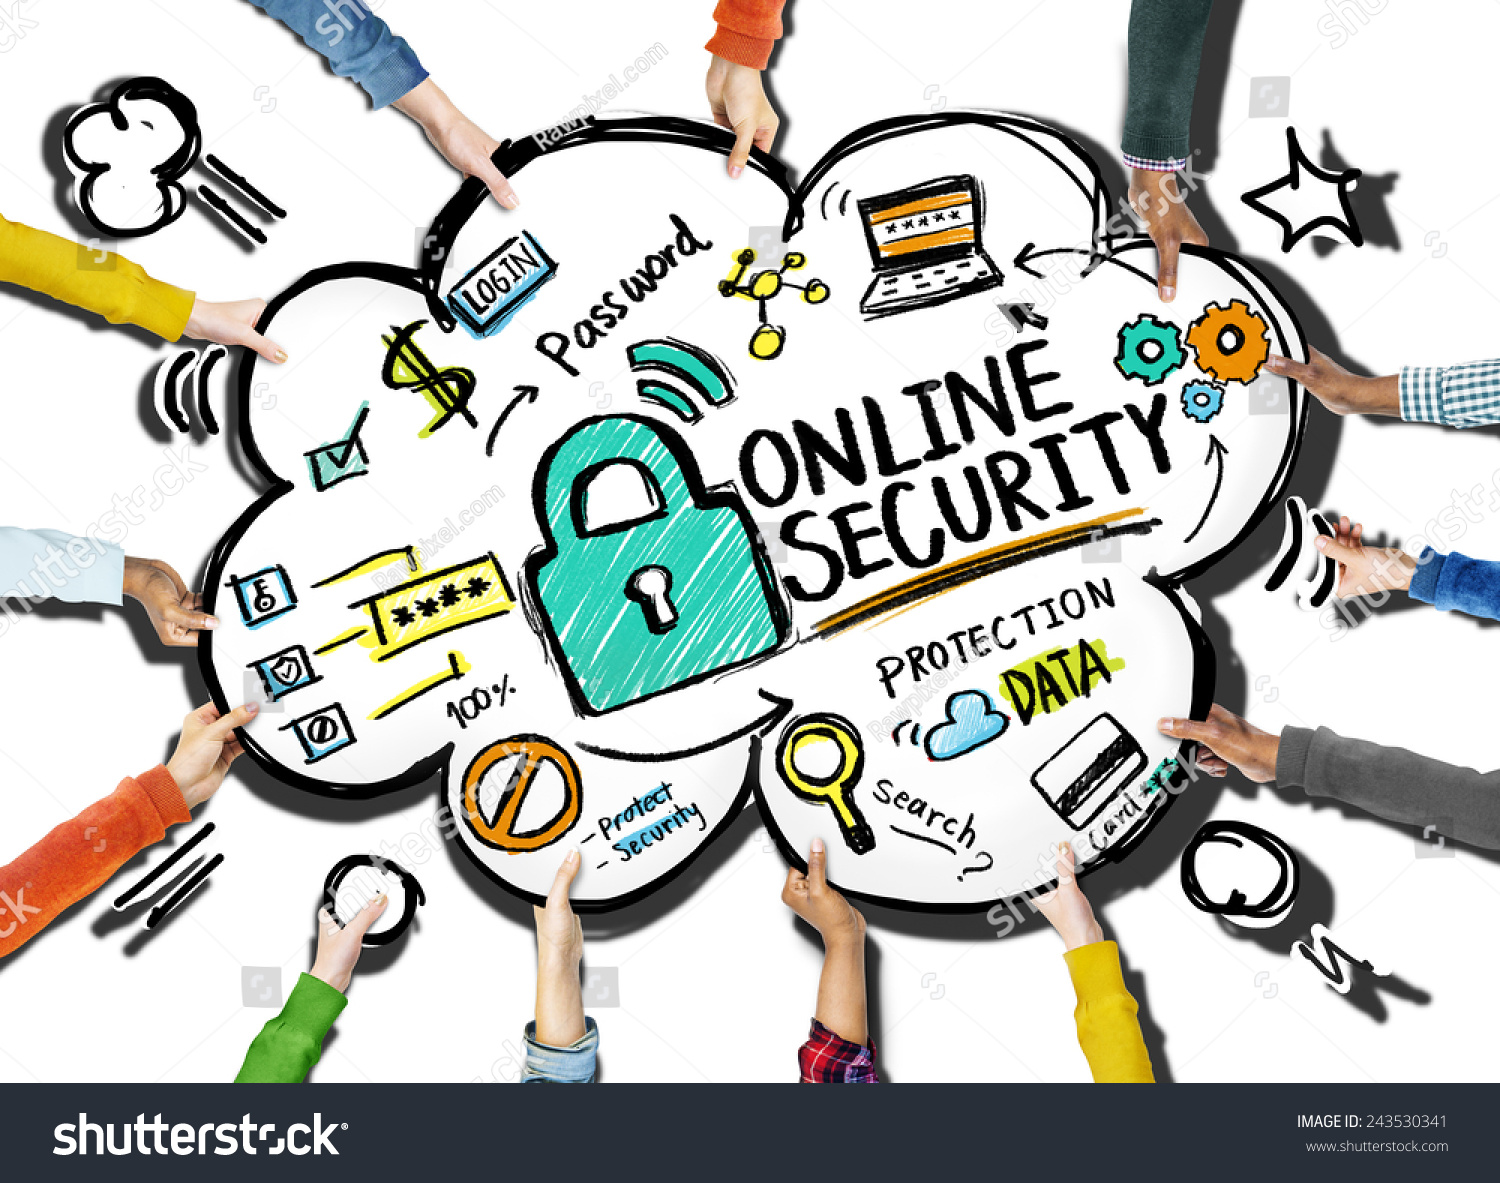 cyber security clipart free - photo #42